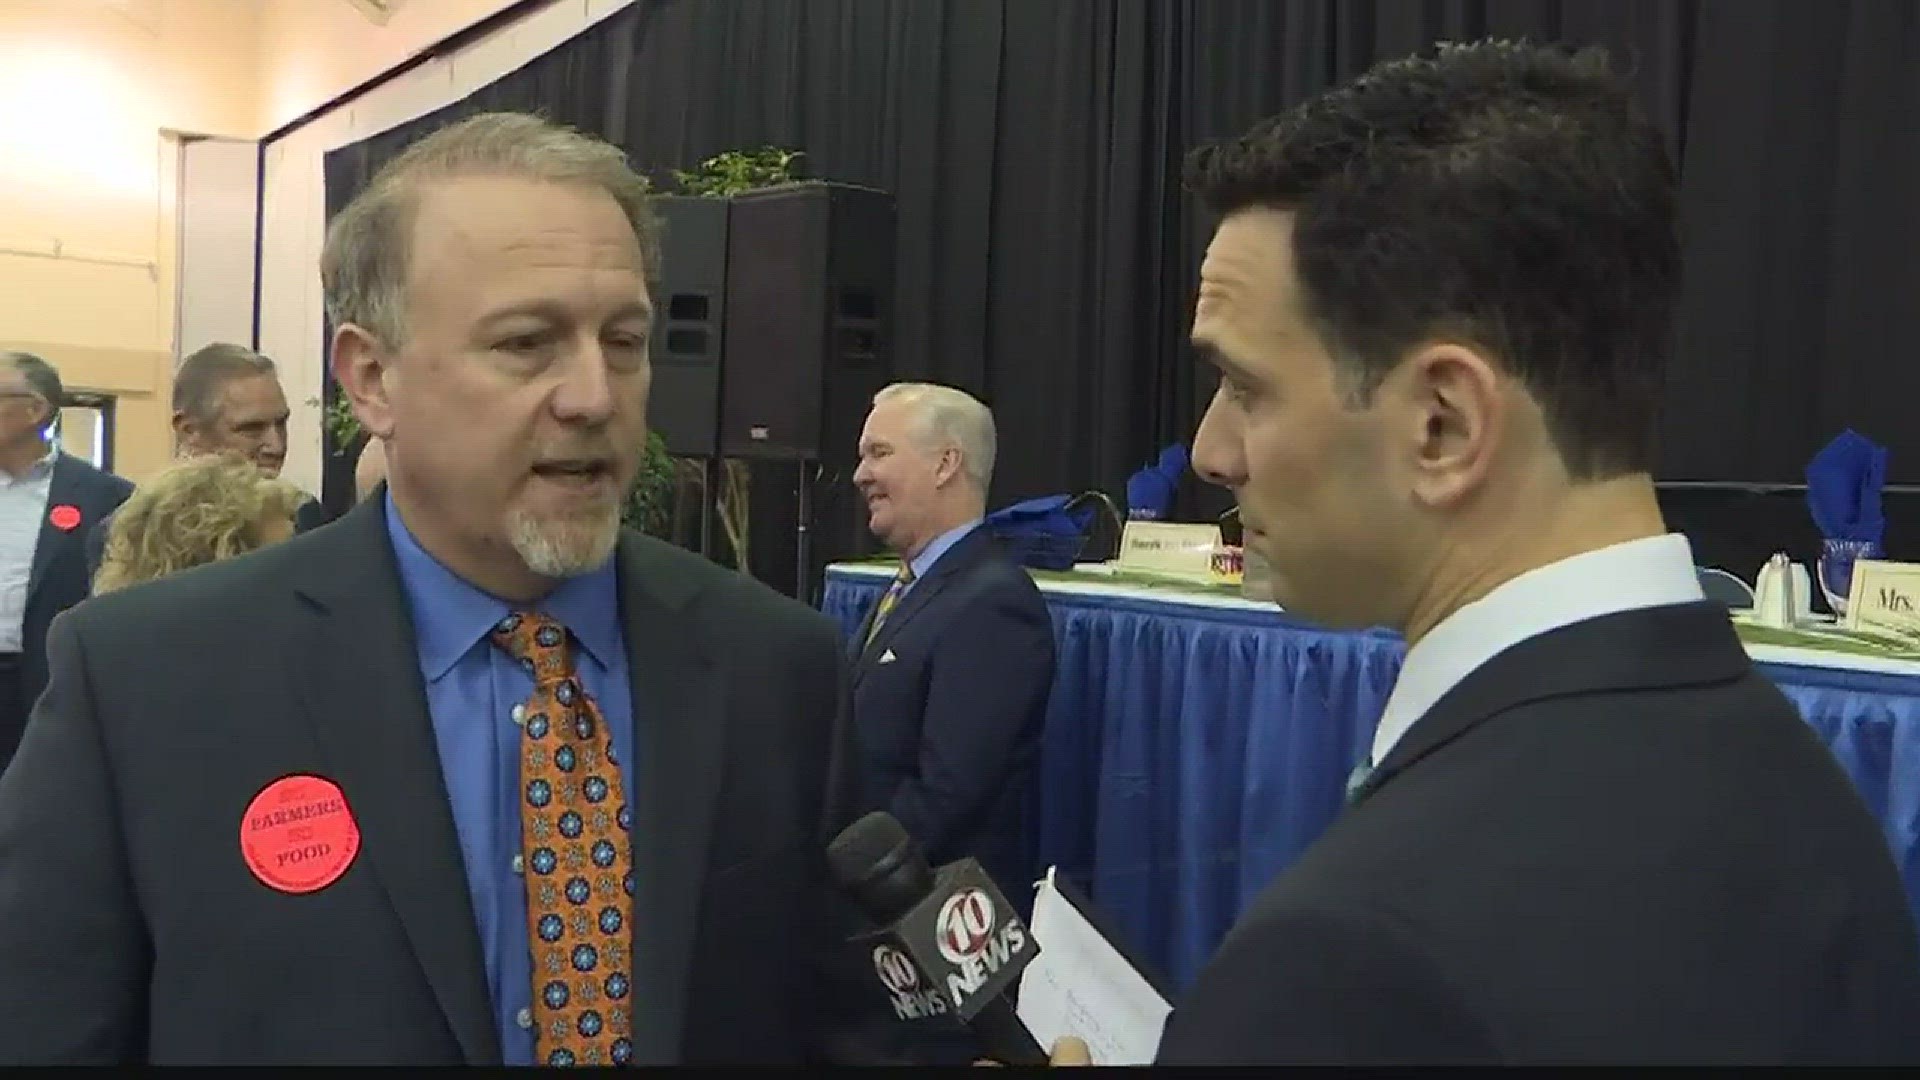 Ken Hagan is once again hesitating to open up about the county commission's plans.